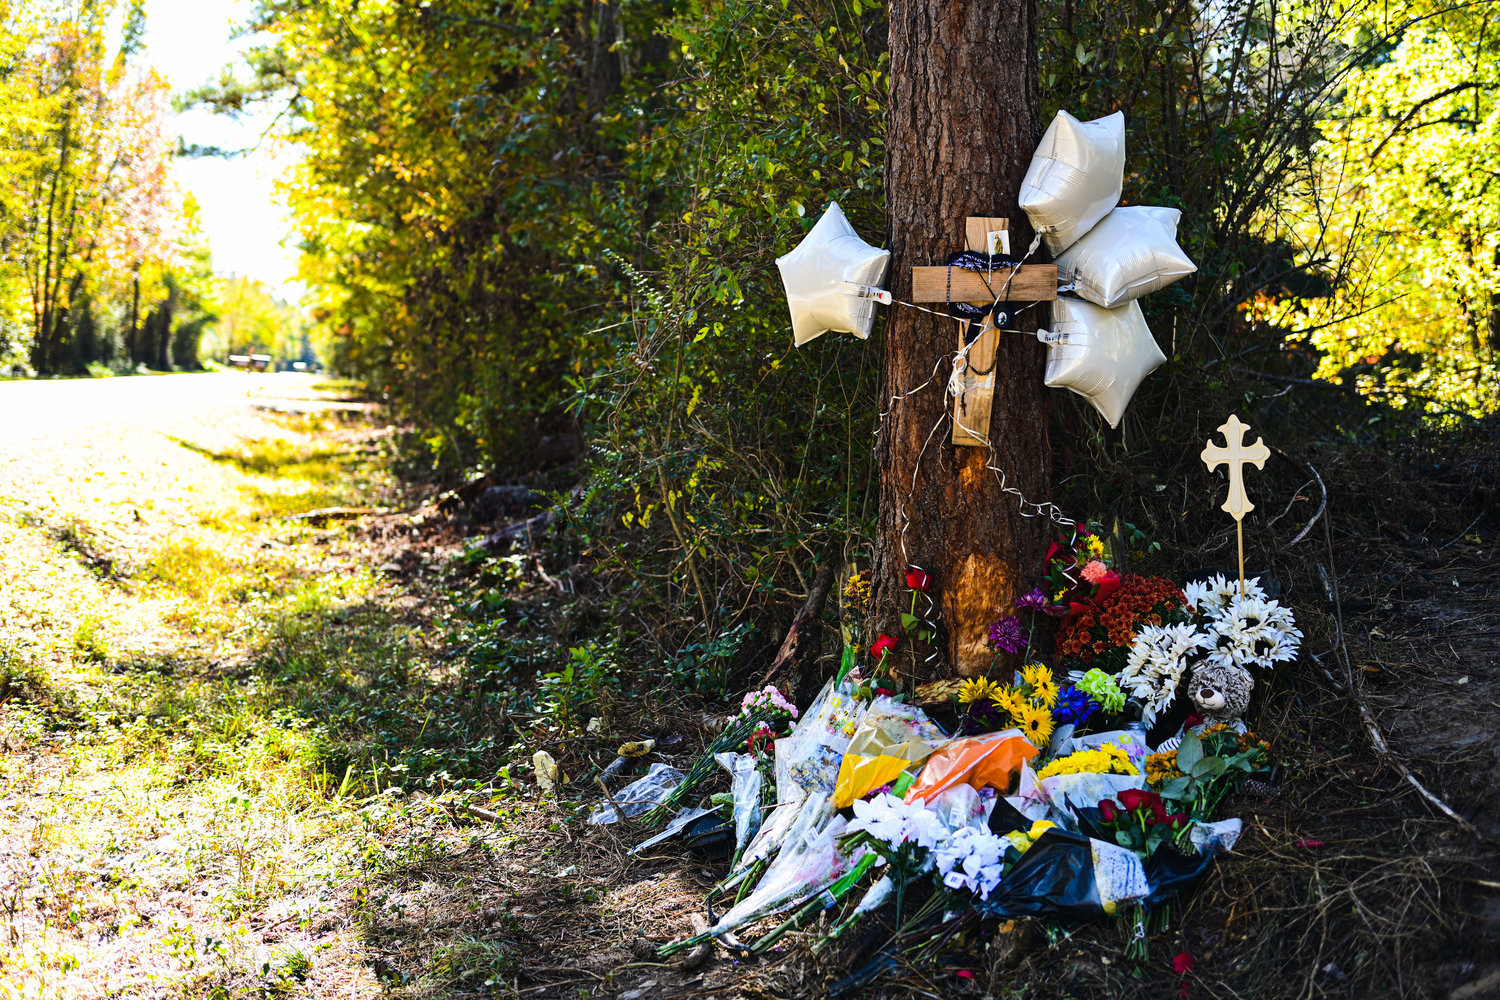 A roadside memorial for 18-year-old Northwood student Bryan Vilchis from last Monday, who died in a car crash in Pittsboro on Old Graham Road Saturday.